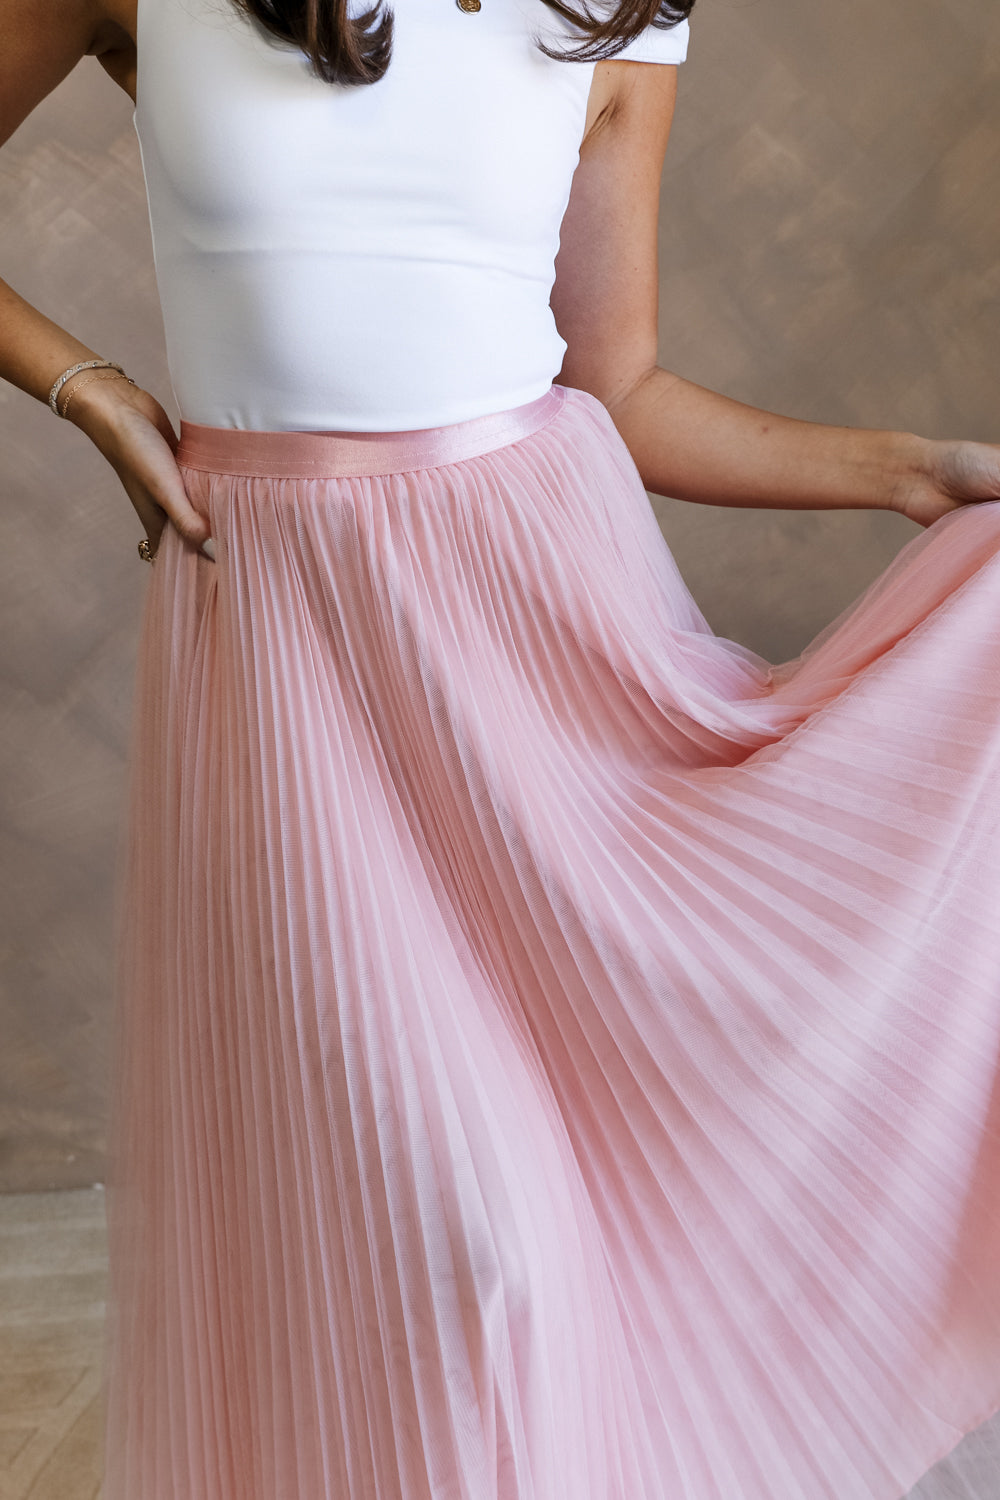 Close up view of female model wearing the Adele Dusty Pink Pleated Tulle Midi Skirt which features Dusty Pink Tulle Pleated Fabric, Dusty Pink Lining, Midi Length and Satin Elastic Band